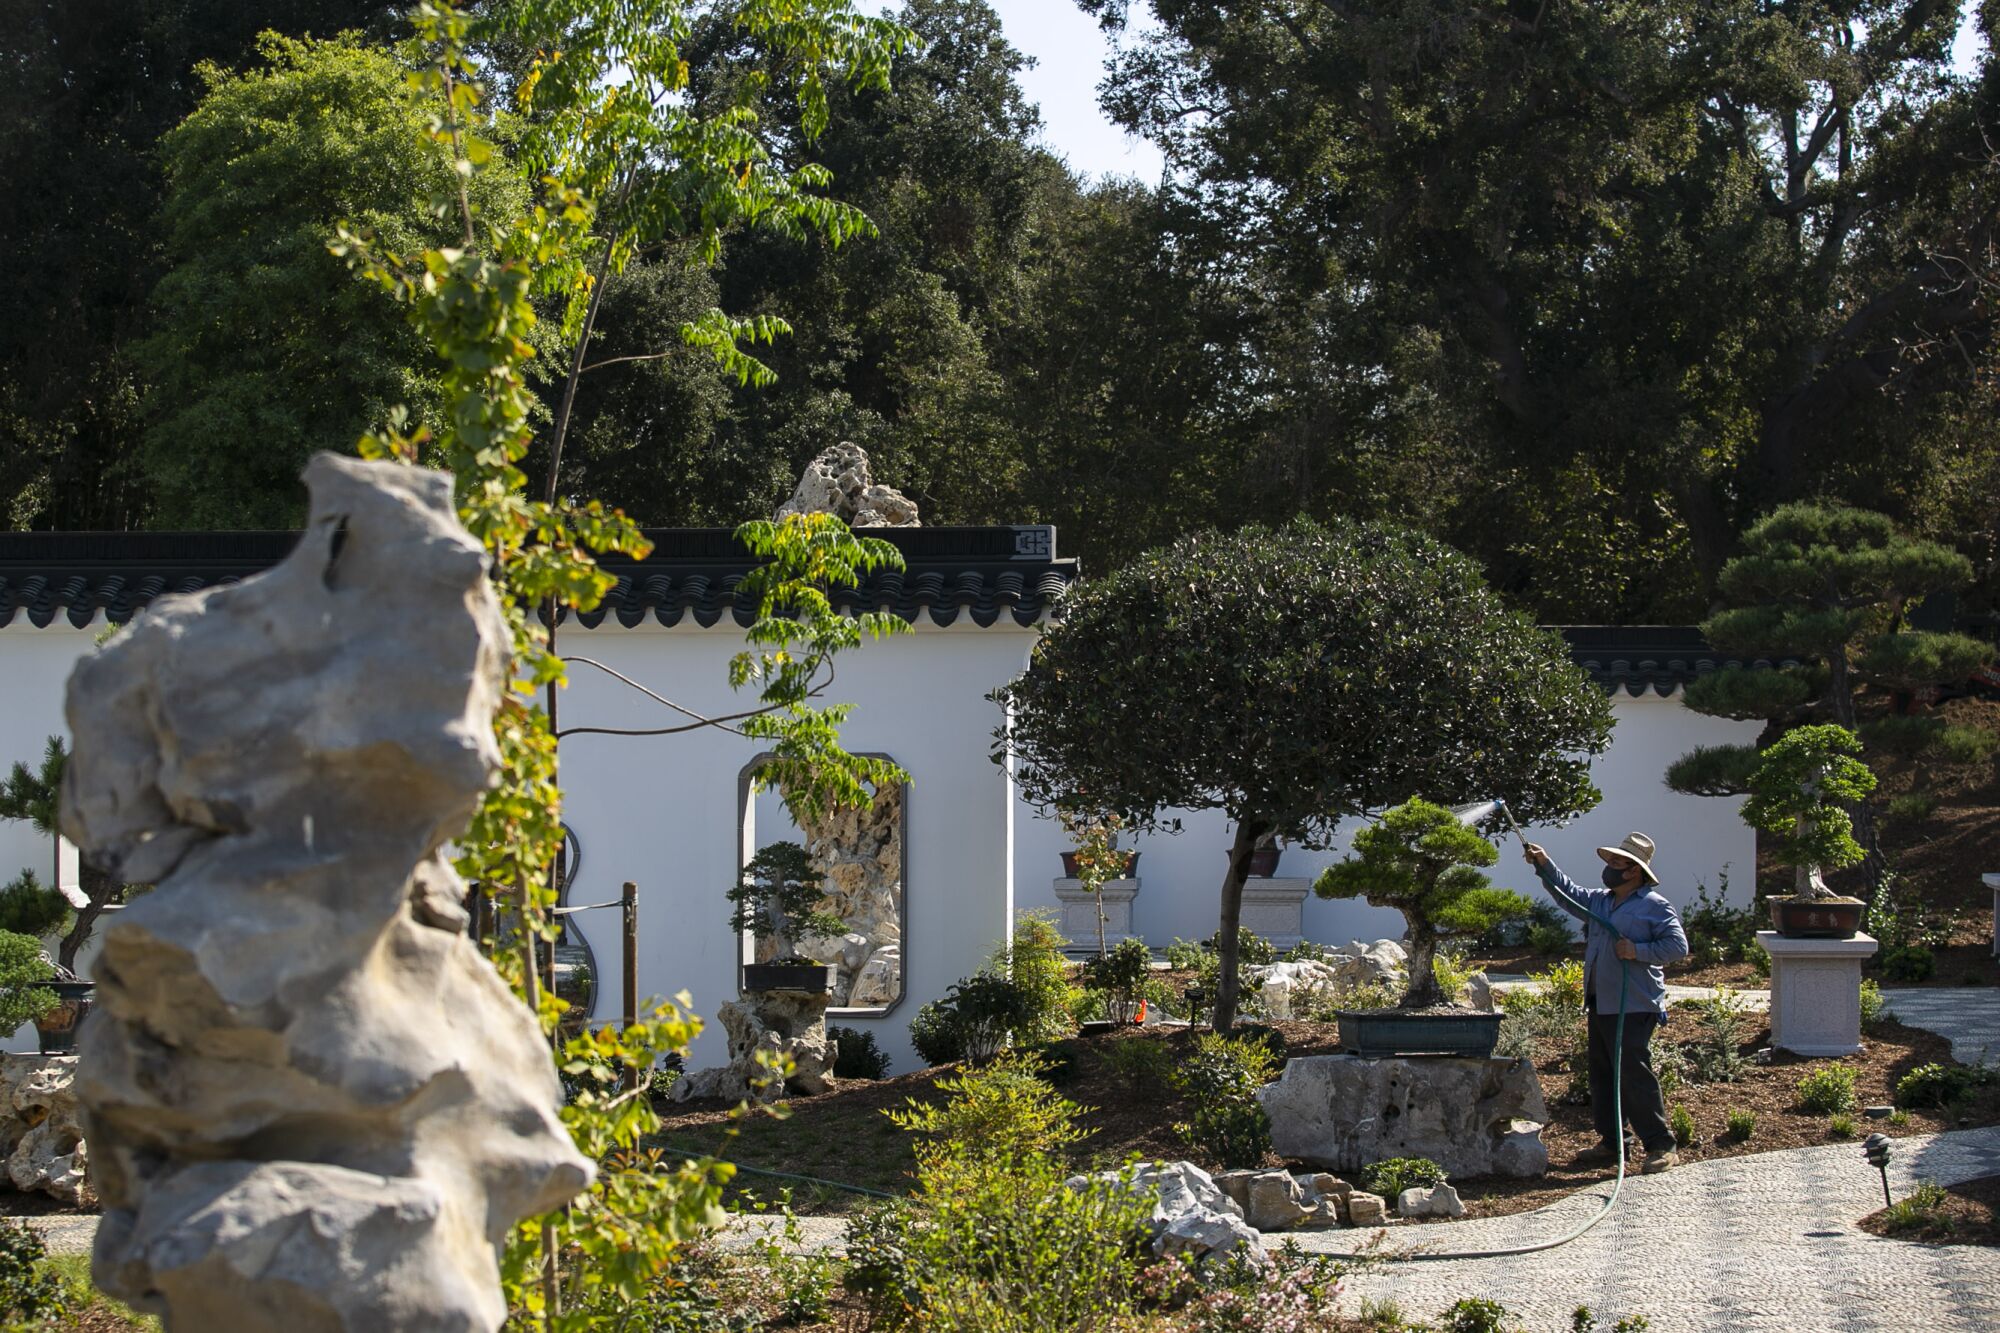 A worker waters outside at the expansion of the Chinese Garden at the Huntington.